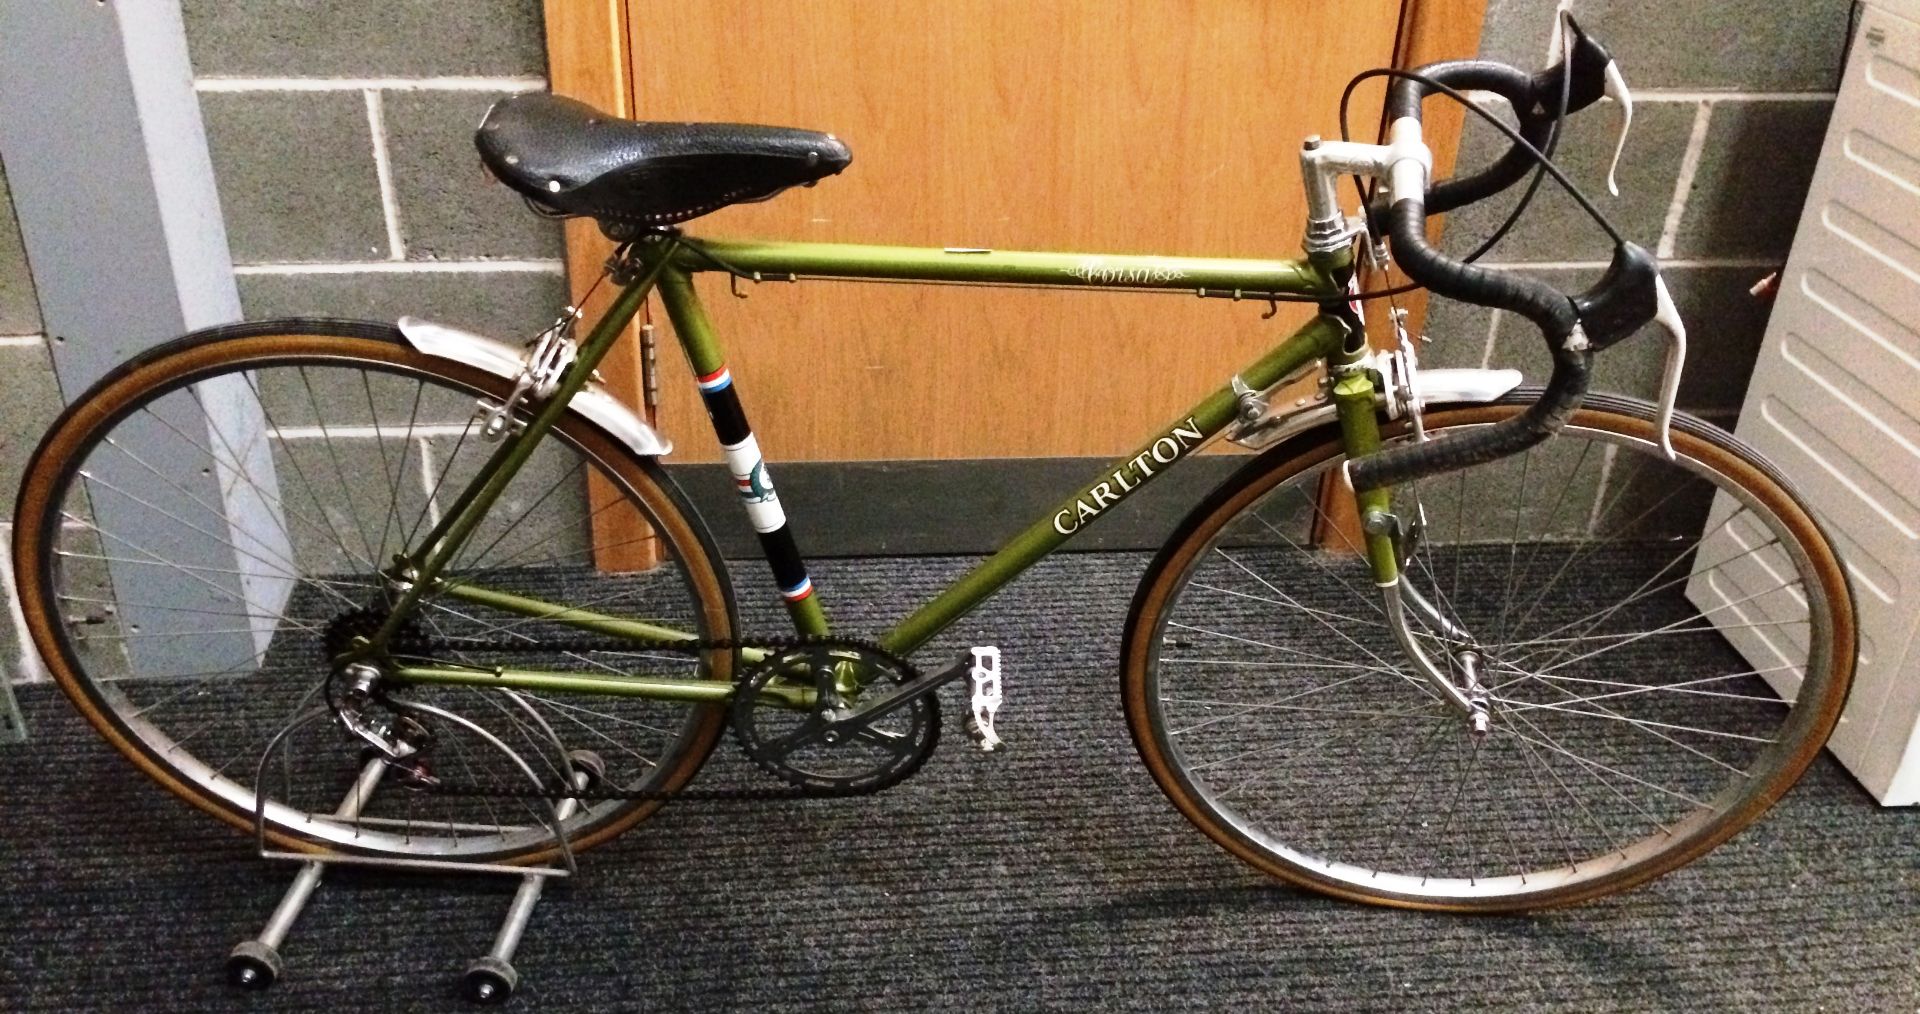 A Carlton Corsa 5 speed gentleman's racing bicycle with drop handle bars in green - Image 3 of 3